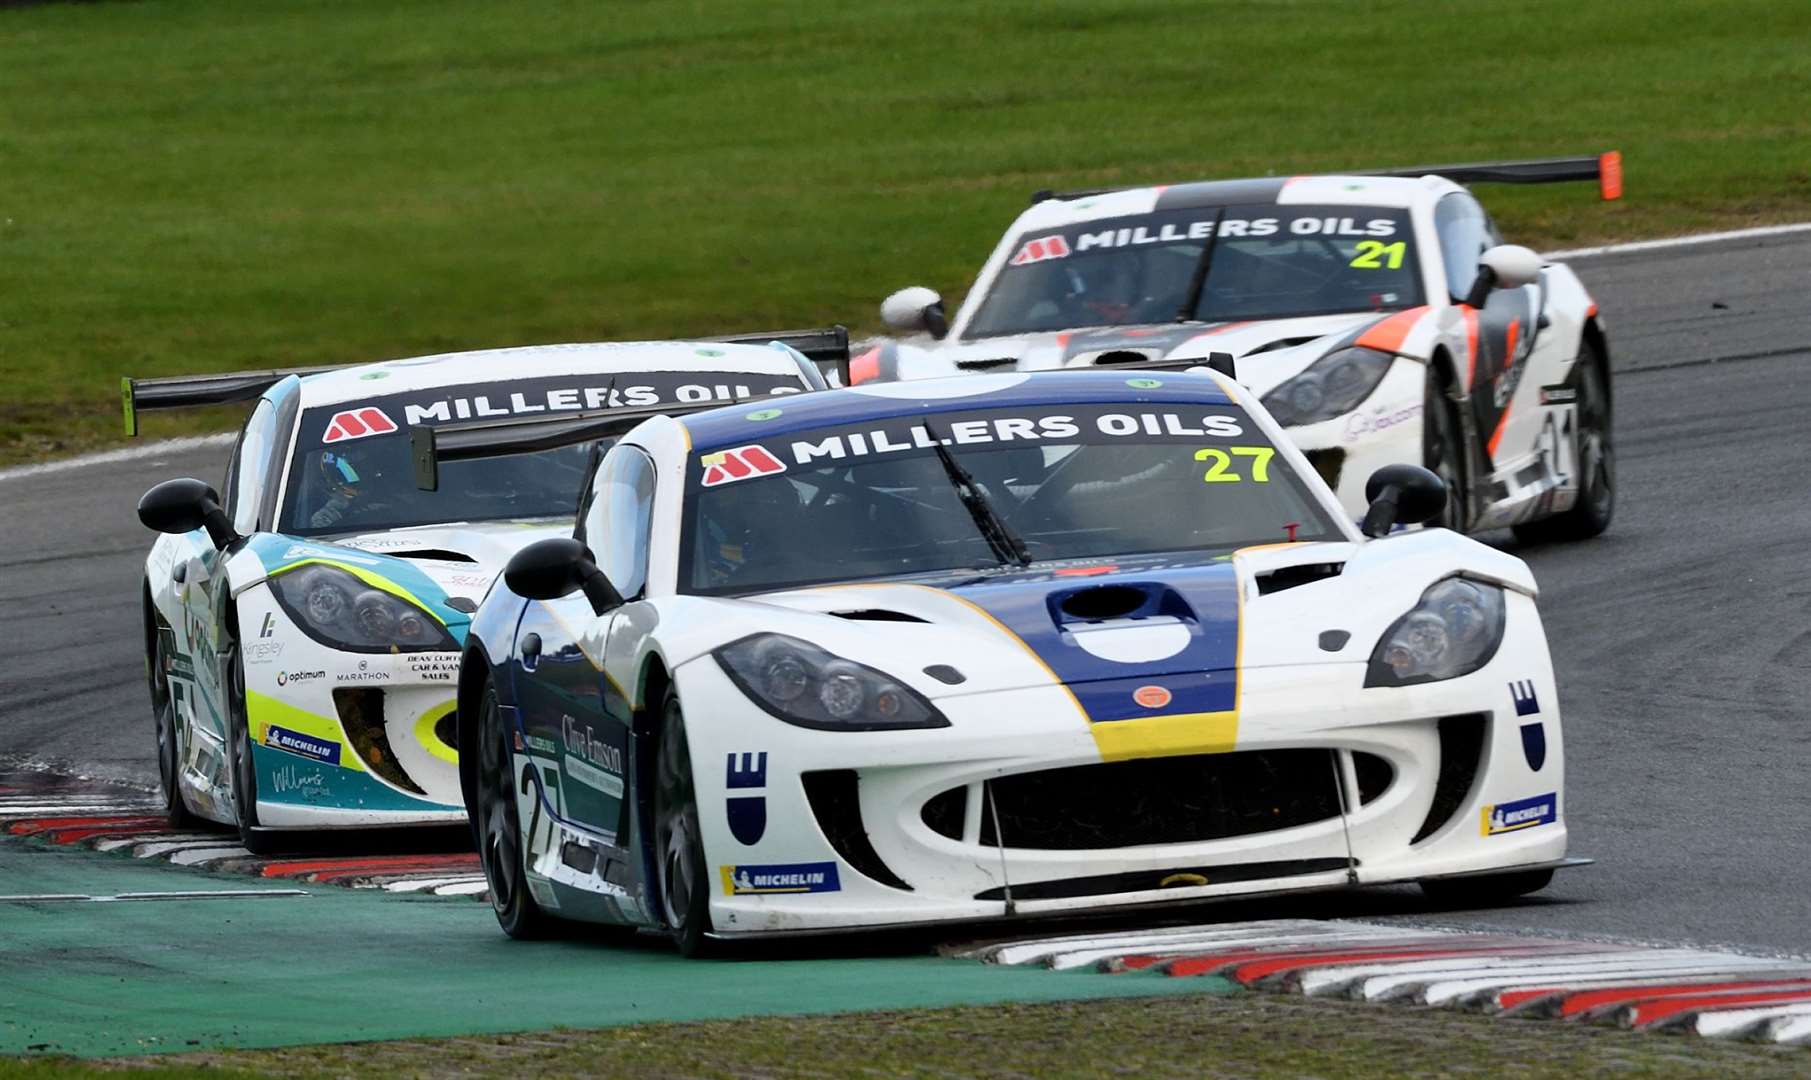 Tom Emson, grandson of auctioneer Clive, finished 11th, sixth and first in the Ginetta GT4 Supercup races. He claimed six podiums this year on his way to sixth in the standings for Elite Motorsport